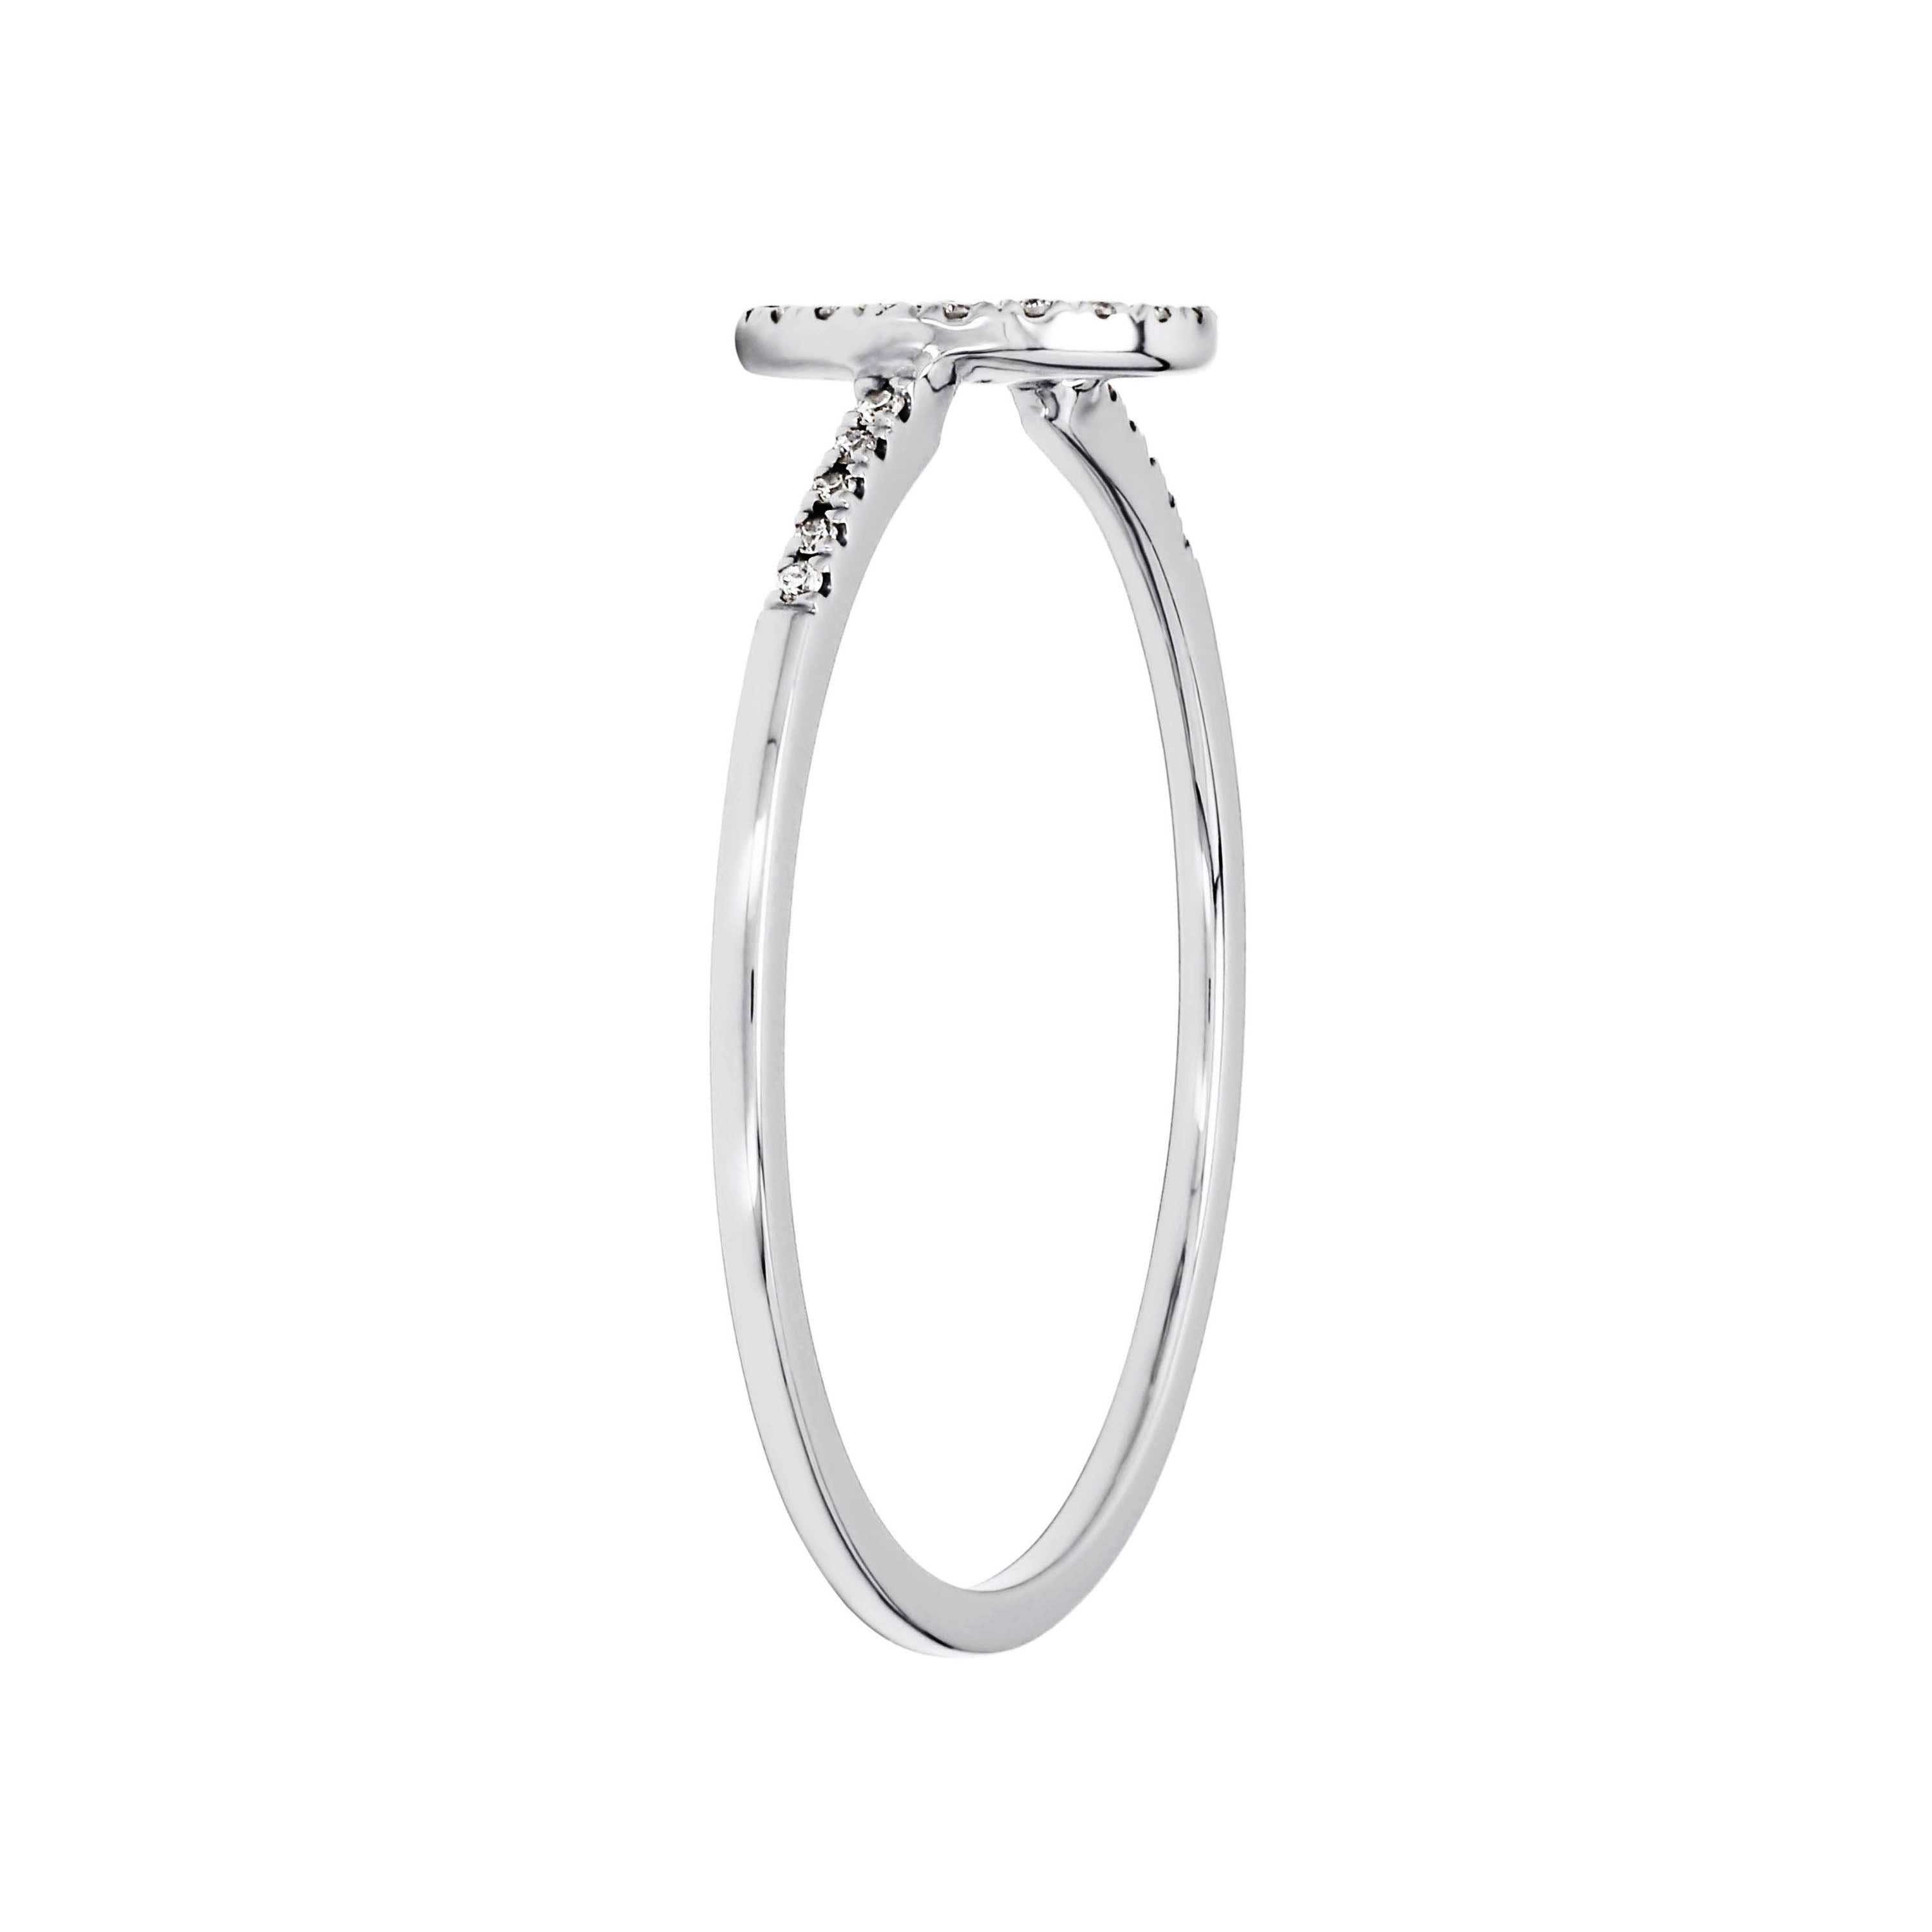 Adamar Jewels Peace Ring in 18K white gold set with diamonds